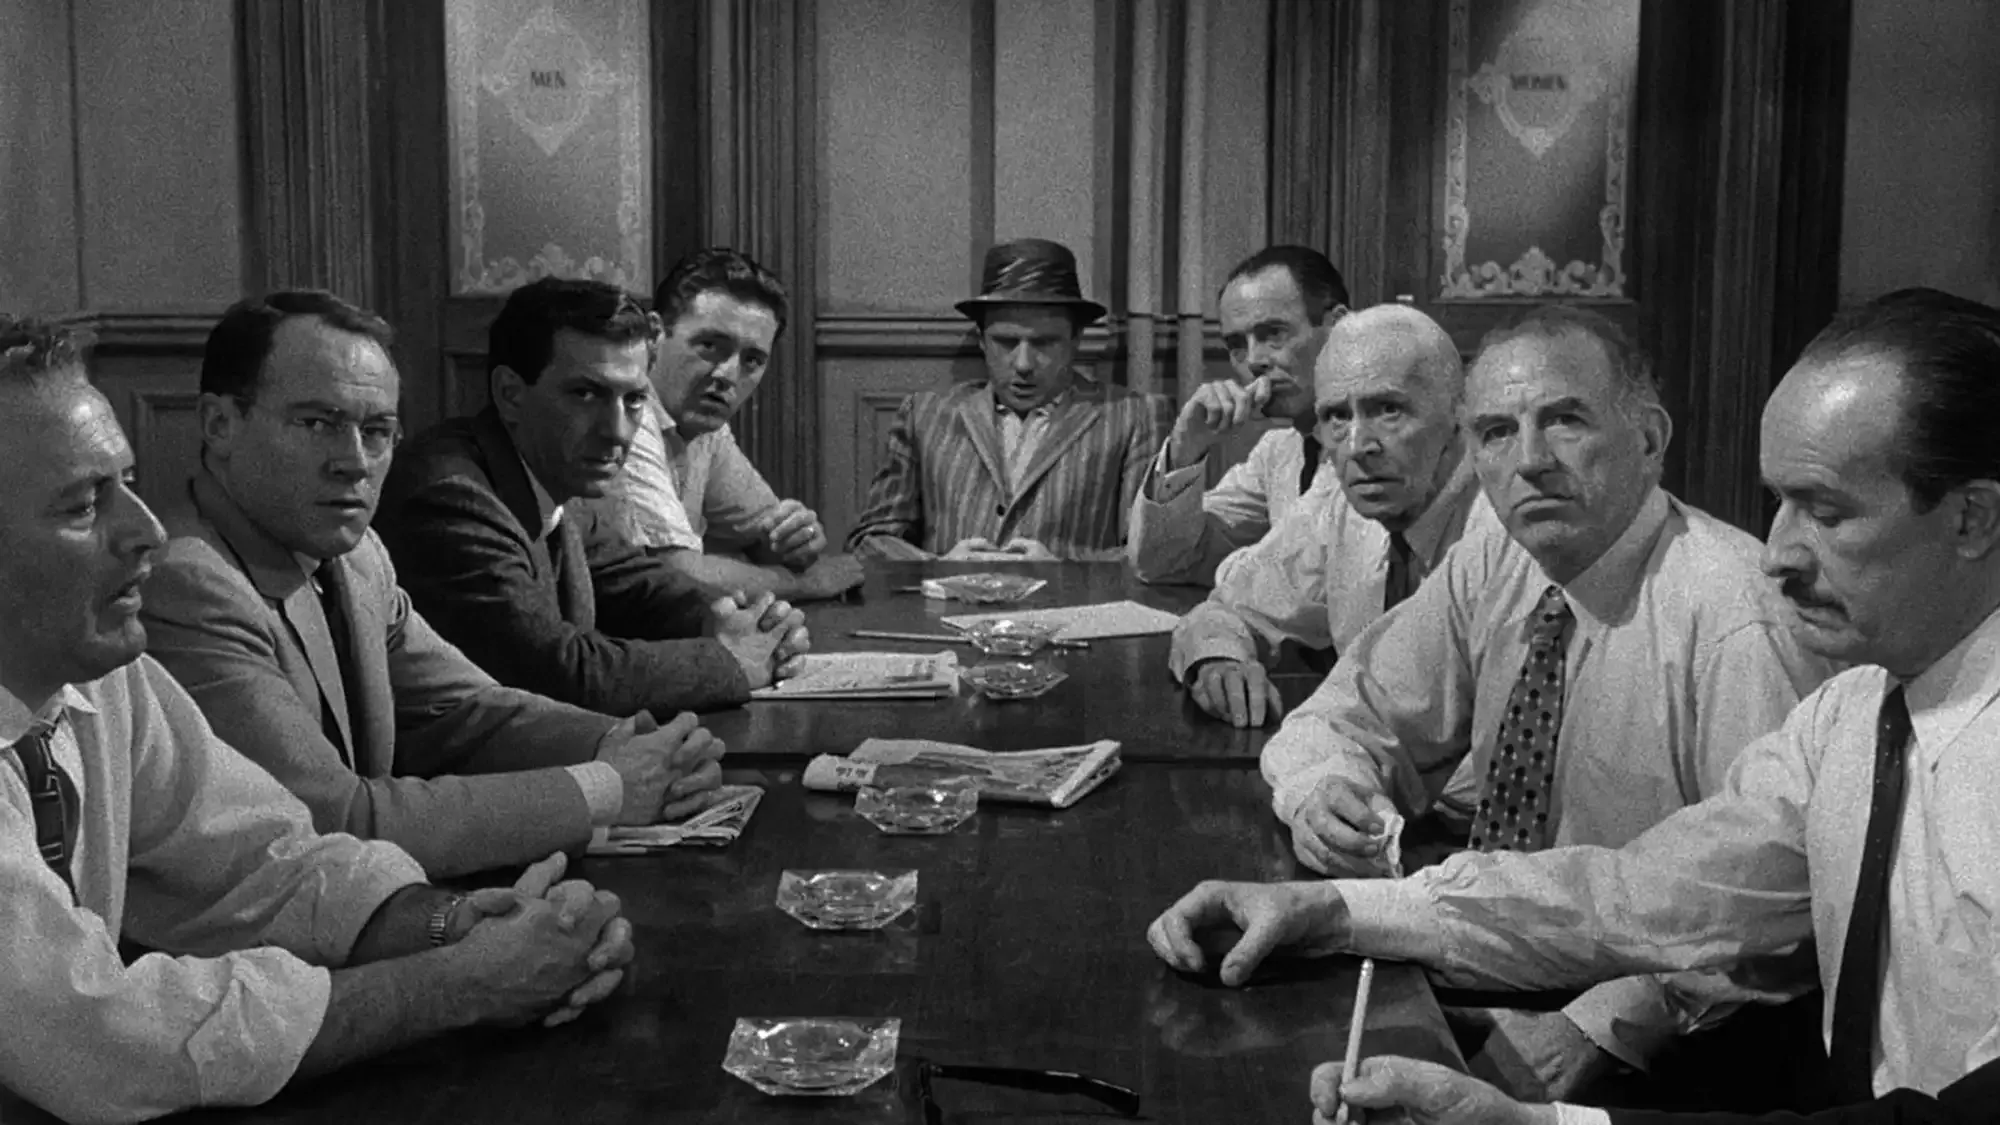 12 Angry Men movie review